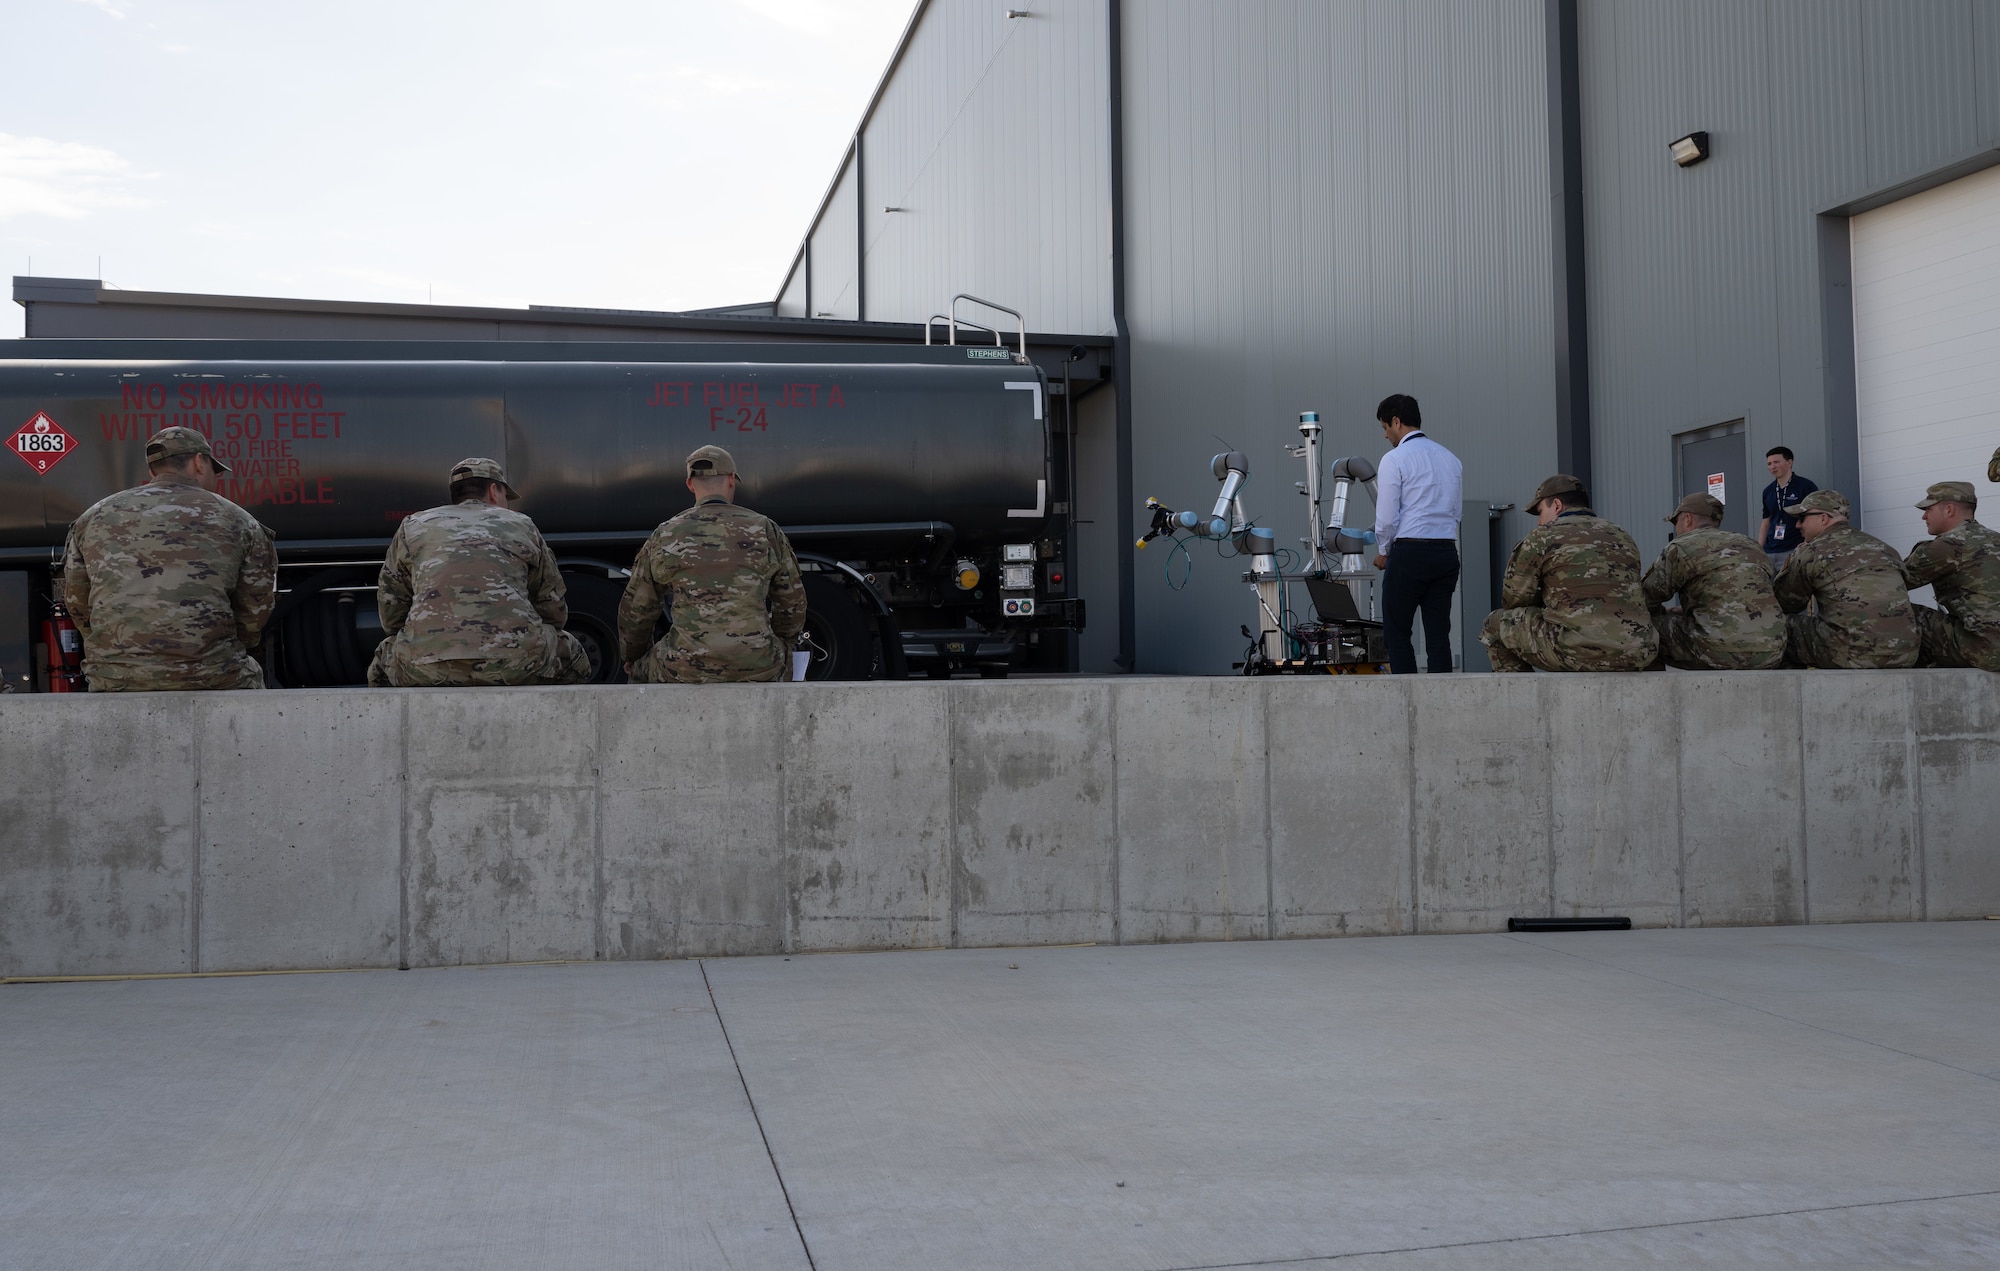 Shashwat Srivastav, Aivot chief executive officer, prepares to demonstrate his company’s robot working on a fuel truck during STRATO-Tech, a convention for the sustainment of the KC-135 Stratotanker, April 24, 2024, in Wichita, Kansas. STRATO-Tech is an initiative under the Sustainment Technologies, Research and Automation for Transformative Operations Testbed that studies, develops and tests innovations to improve the efficiency and cost-effectiveness of the KC-135.  (U.S. Air Force photo by Staff Sgt. Tryphena Mayhugh)